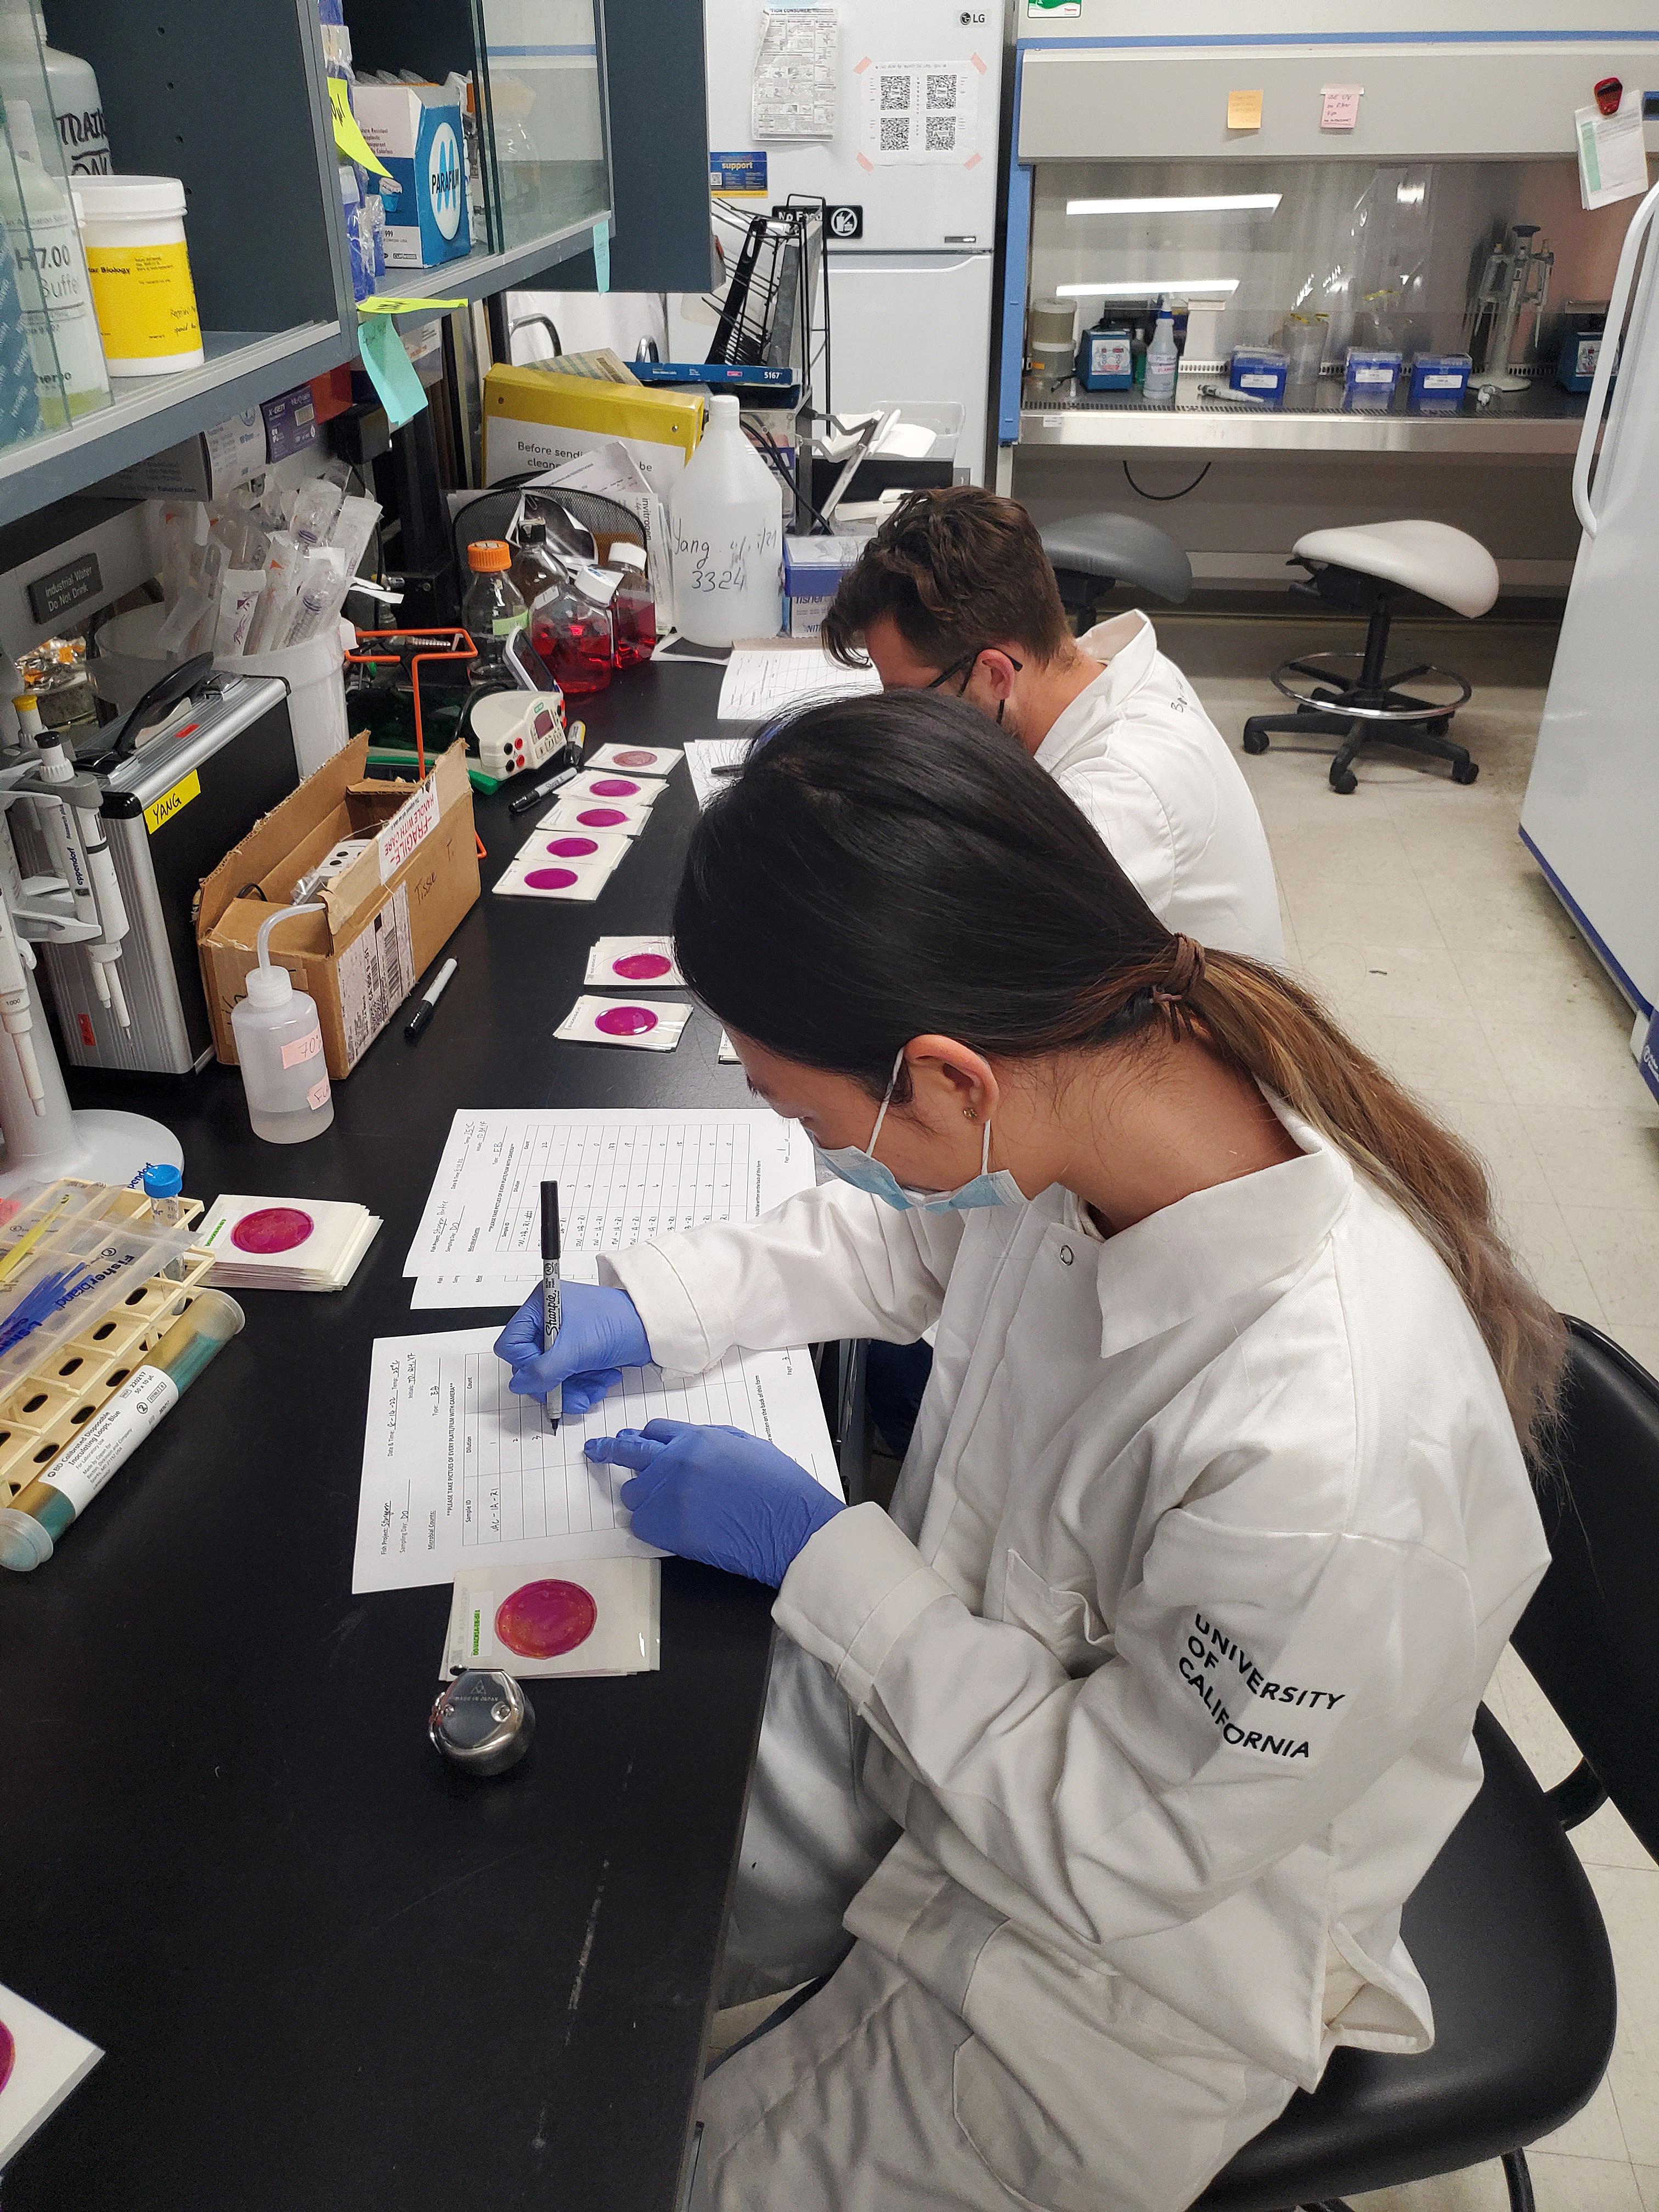 Microbial tests performed in the lab - Yang project